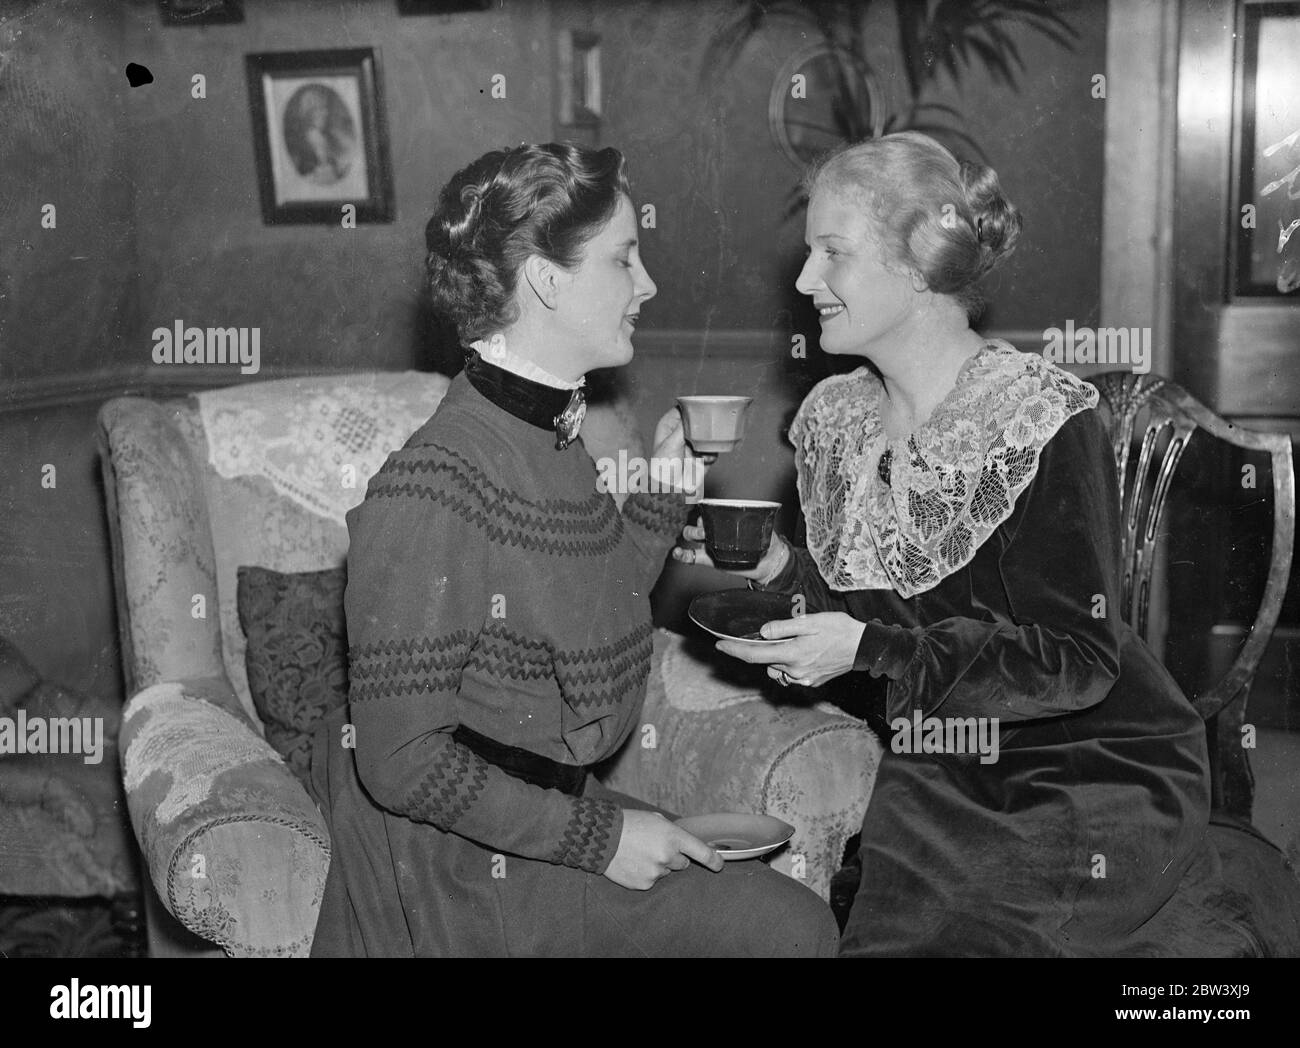 The two candidas Ann Harding wishes successor good luck in Shaw Play. In the costume she wore for the part, Miss Ann Harding wishes good luck to hear successor, Miss Diana Wynyard, who is taking over the role of Candida in Bernard Shaw's play of that name at the Globe Theatre, Shaftesbury Avenue, London. Photo shows: Miss Ann Harding wishes her successor, Miss Diana Wynyard, good luck at the Globe Theatre. Both are wearing Candida's costume. 30 March 1937 Stock Photo